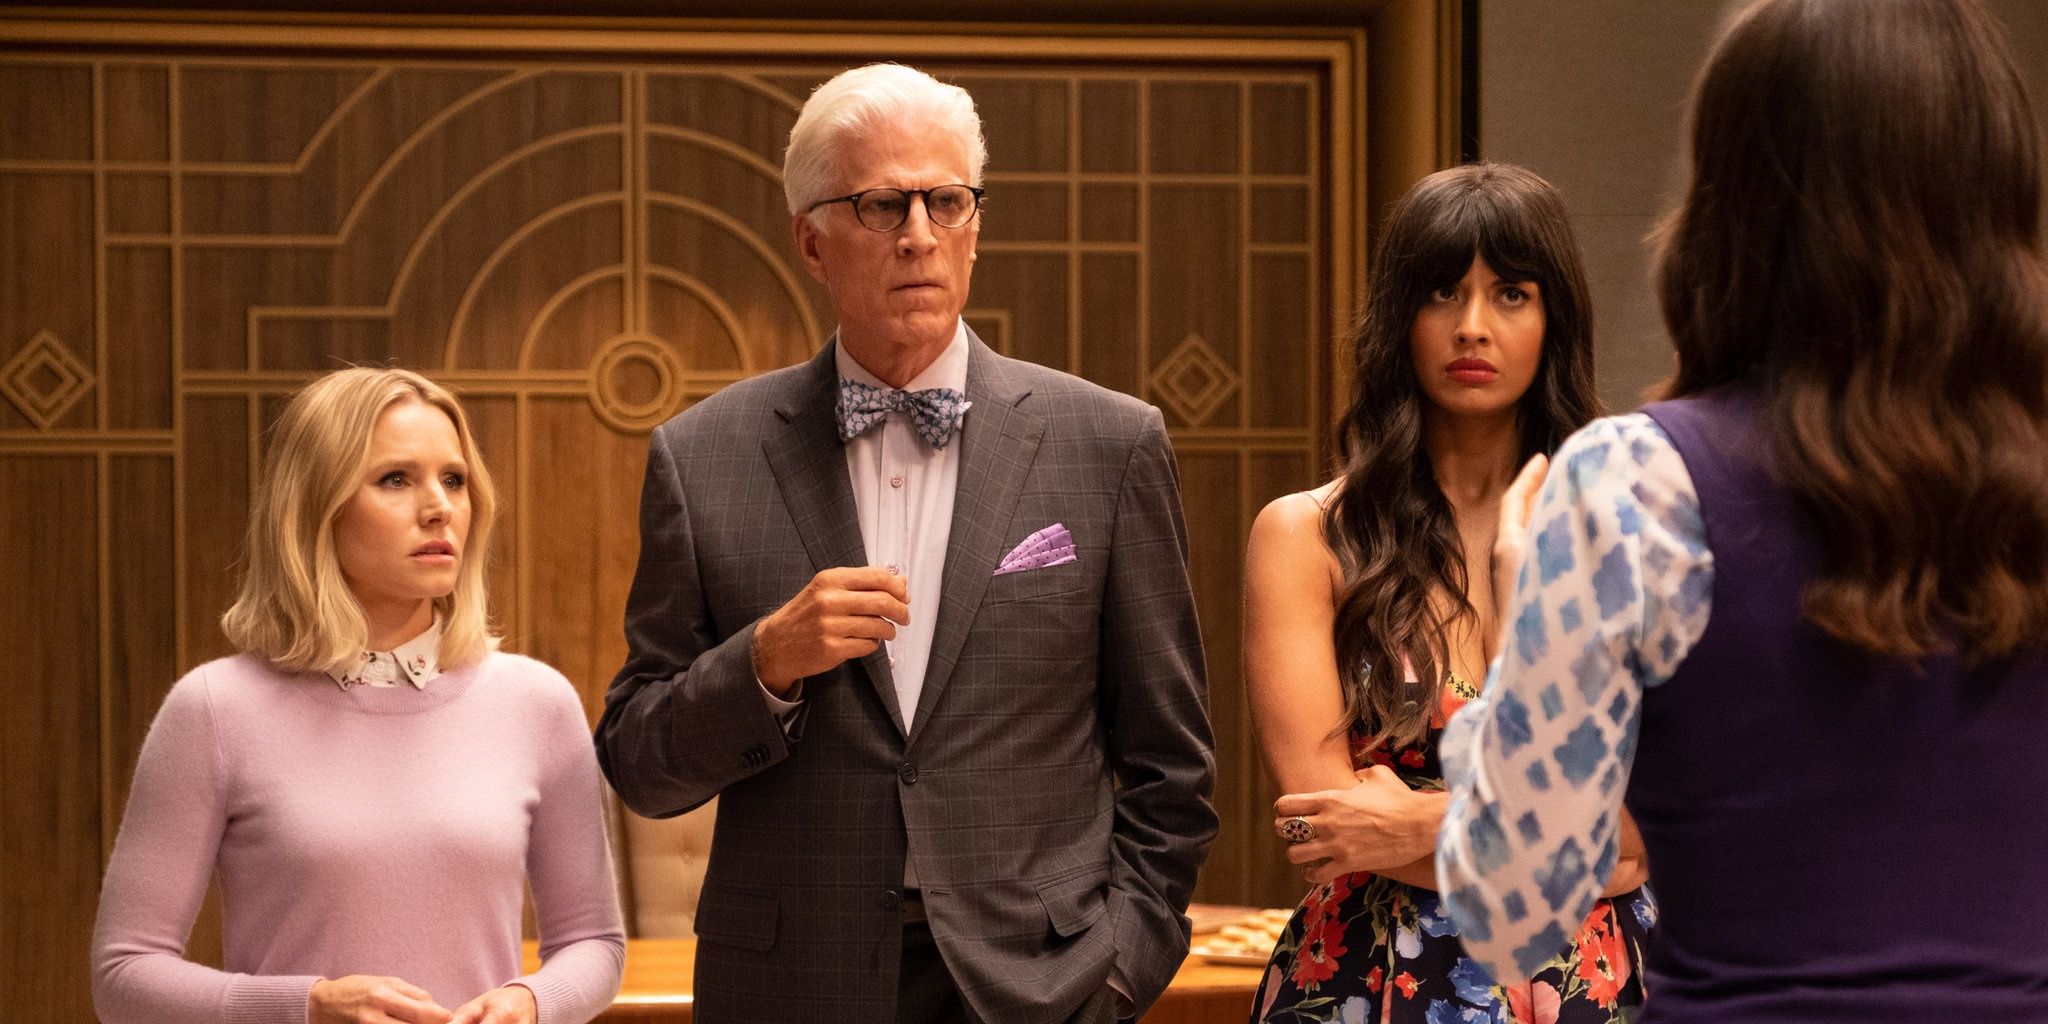 Kristen Bell, Ted Danson, and Jameela Jamil lined up